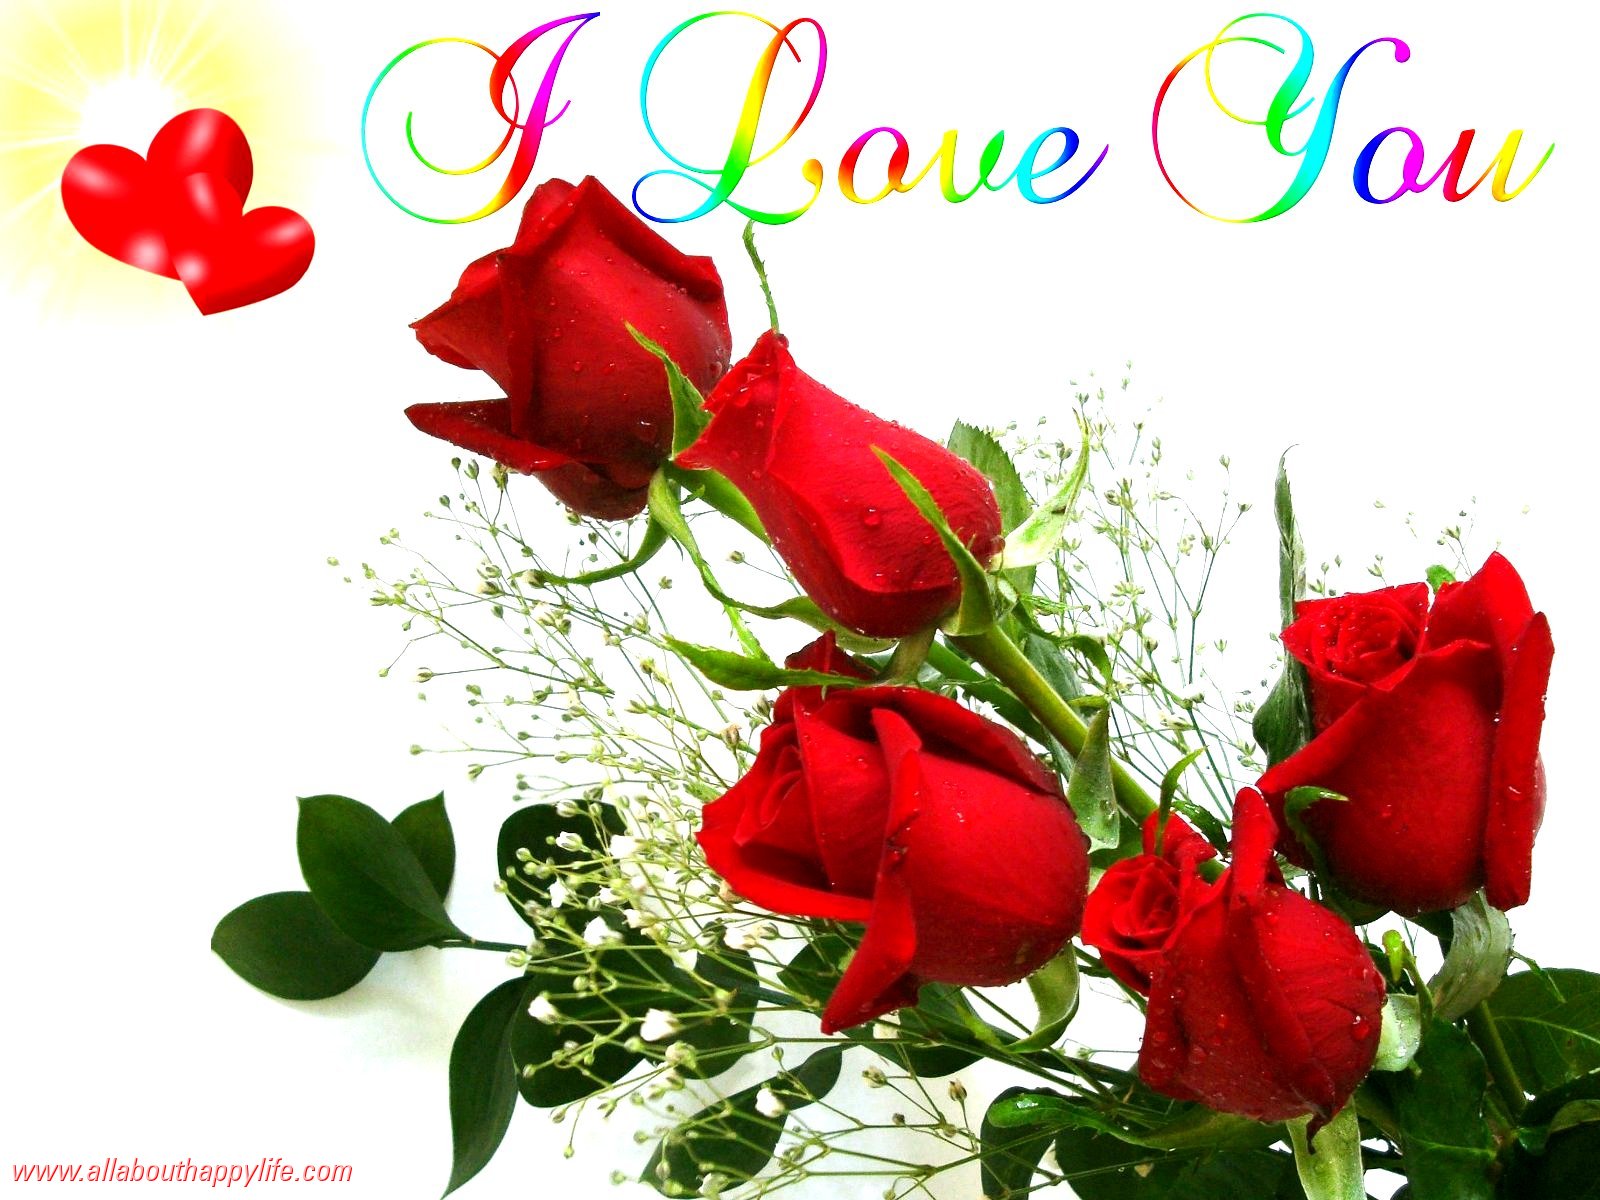 http://www.allabouthappylife.com/wallpapers/love/i-love-you_red-roses_dsc03451.jpg